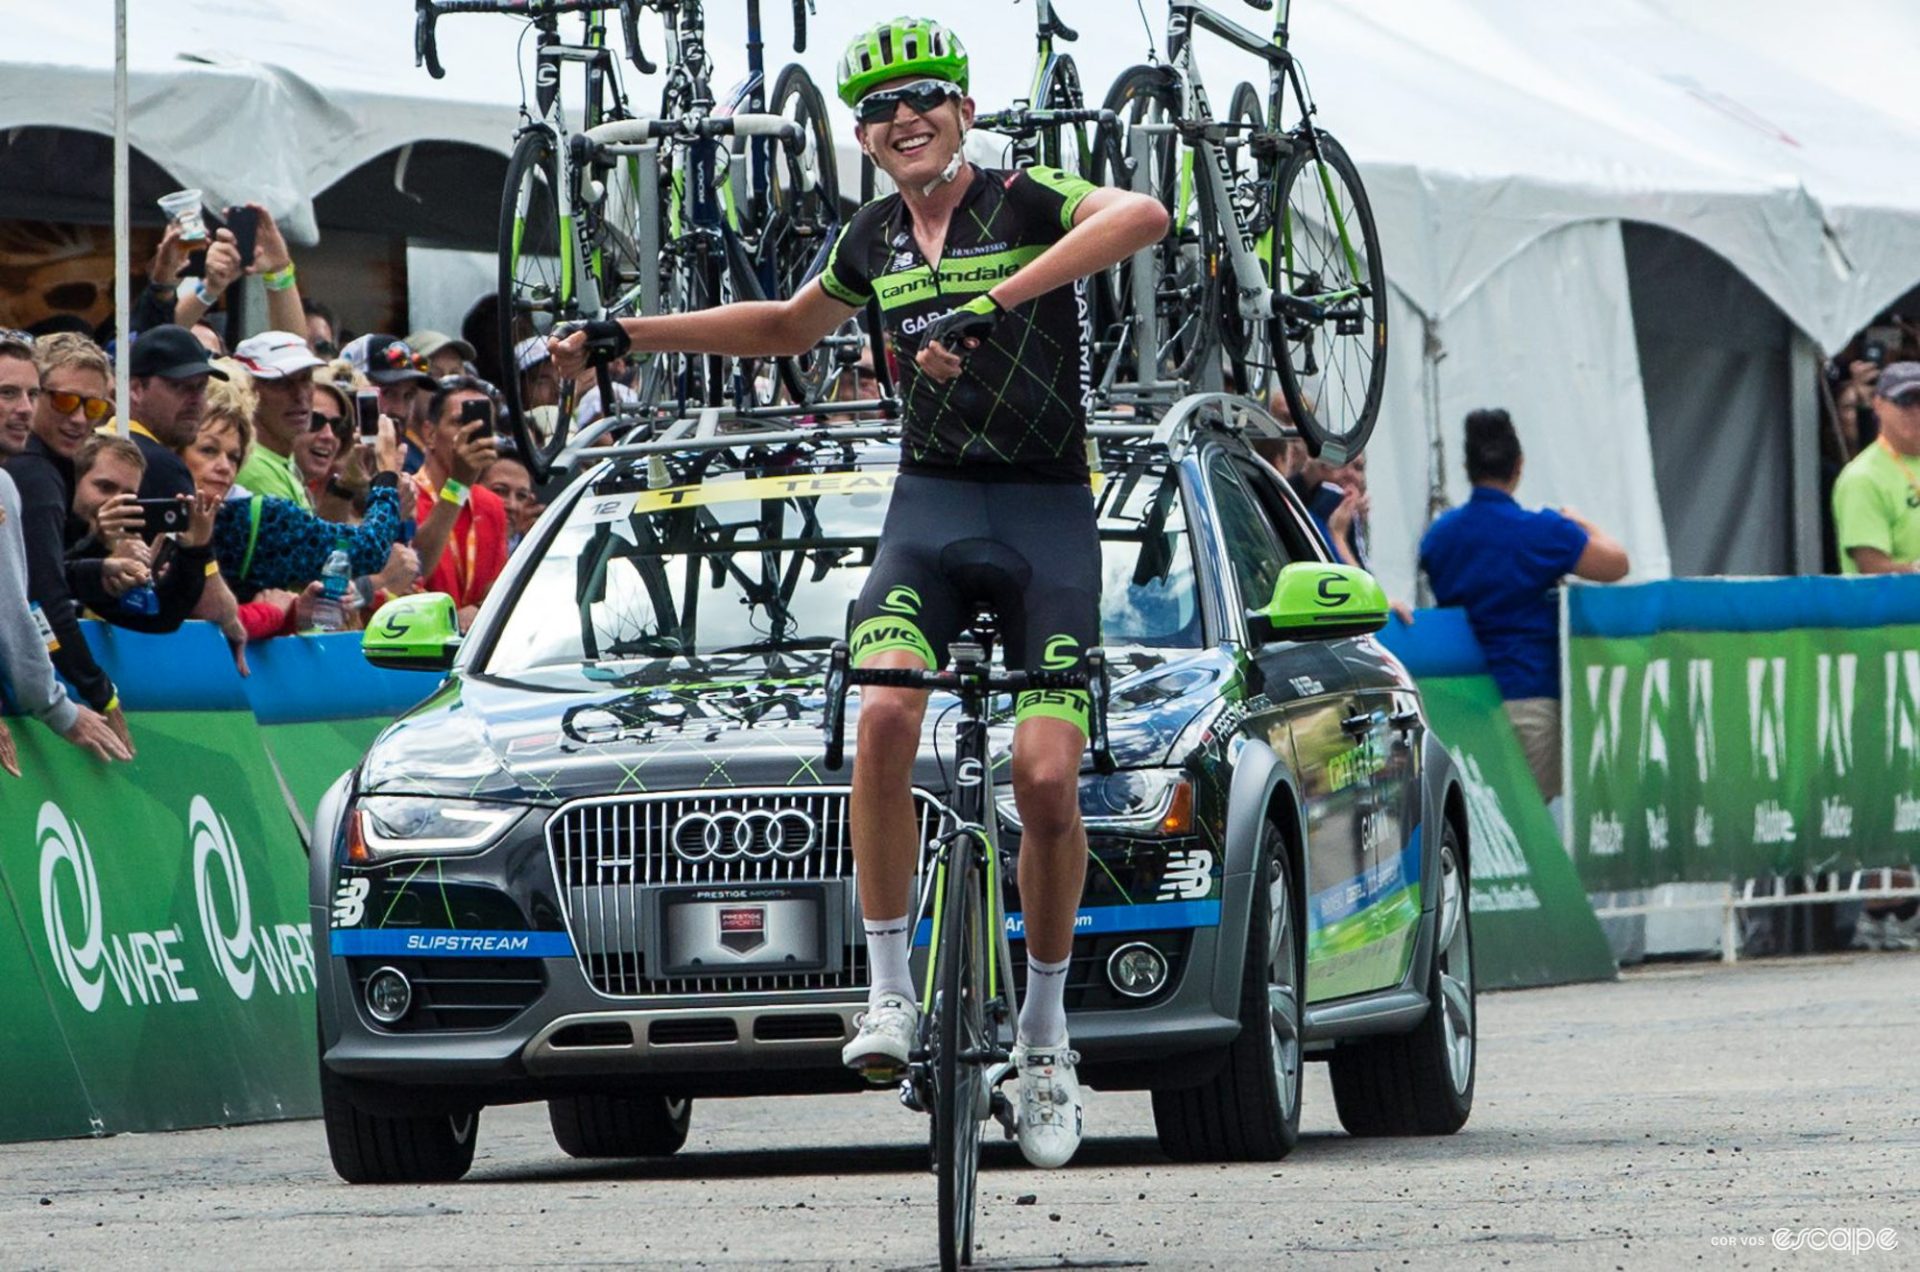 Joe Dombrowski sits up to celebrate as he crosses the line to win the Snowbird stage of the Tour of Utah. His team car is behind him and he has a wide smile on his face.